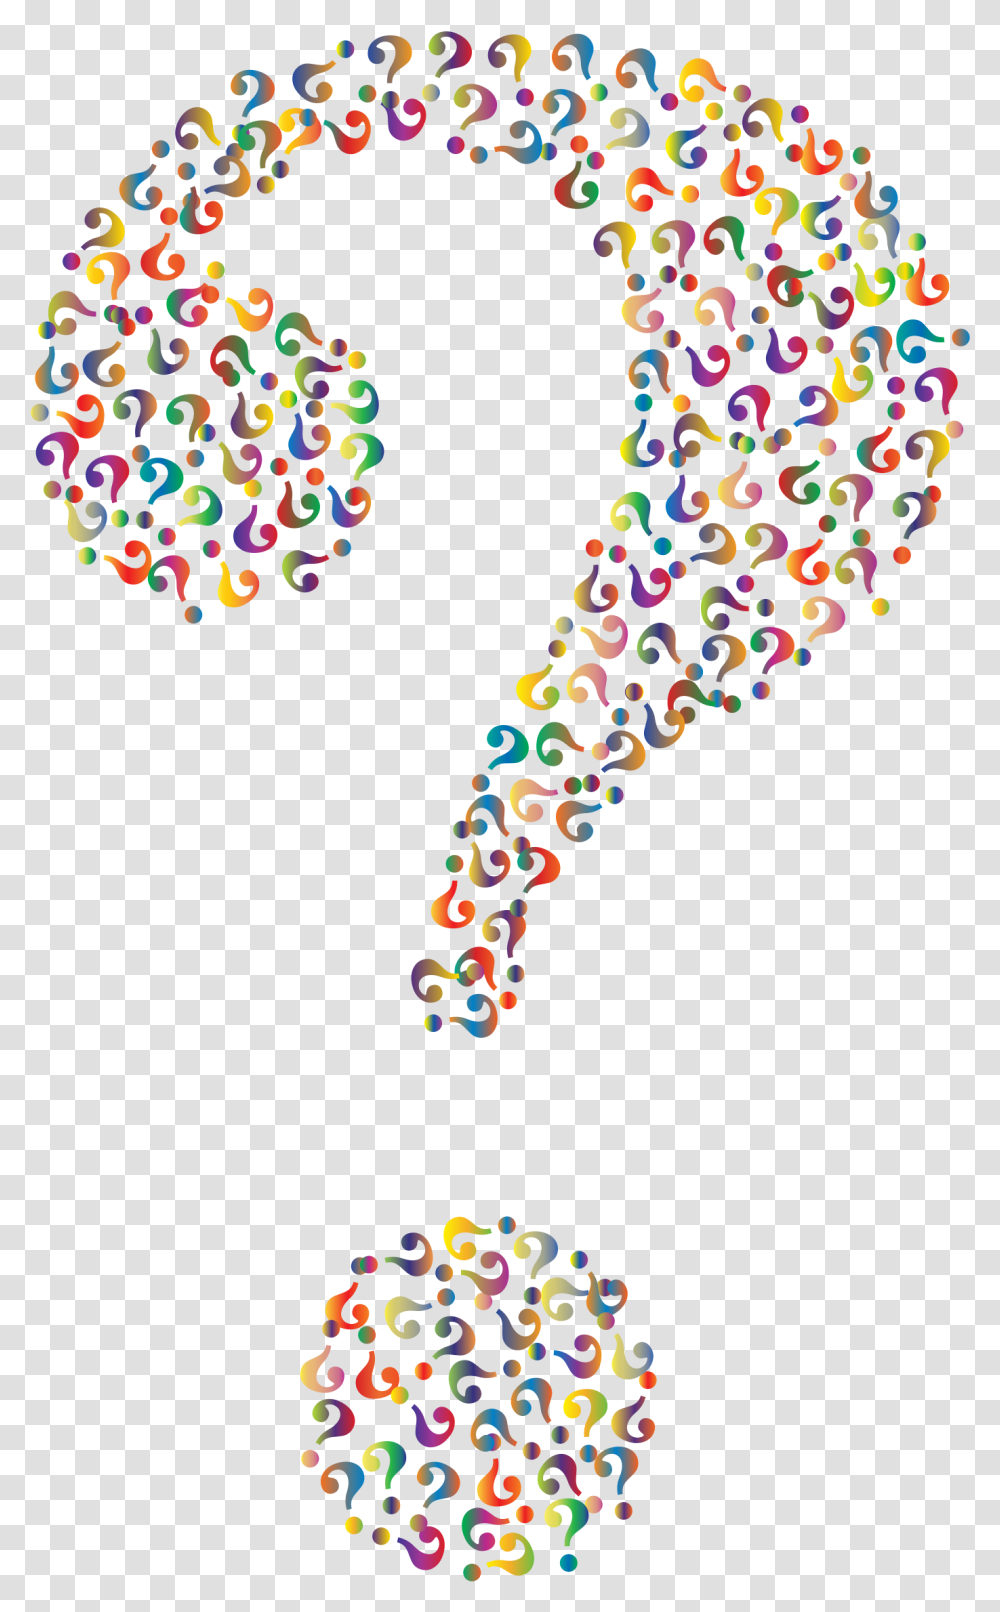 Question Mark No Background Question Marks No Background, Paper, Confetti Transparent Png